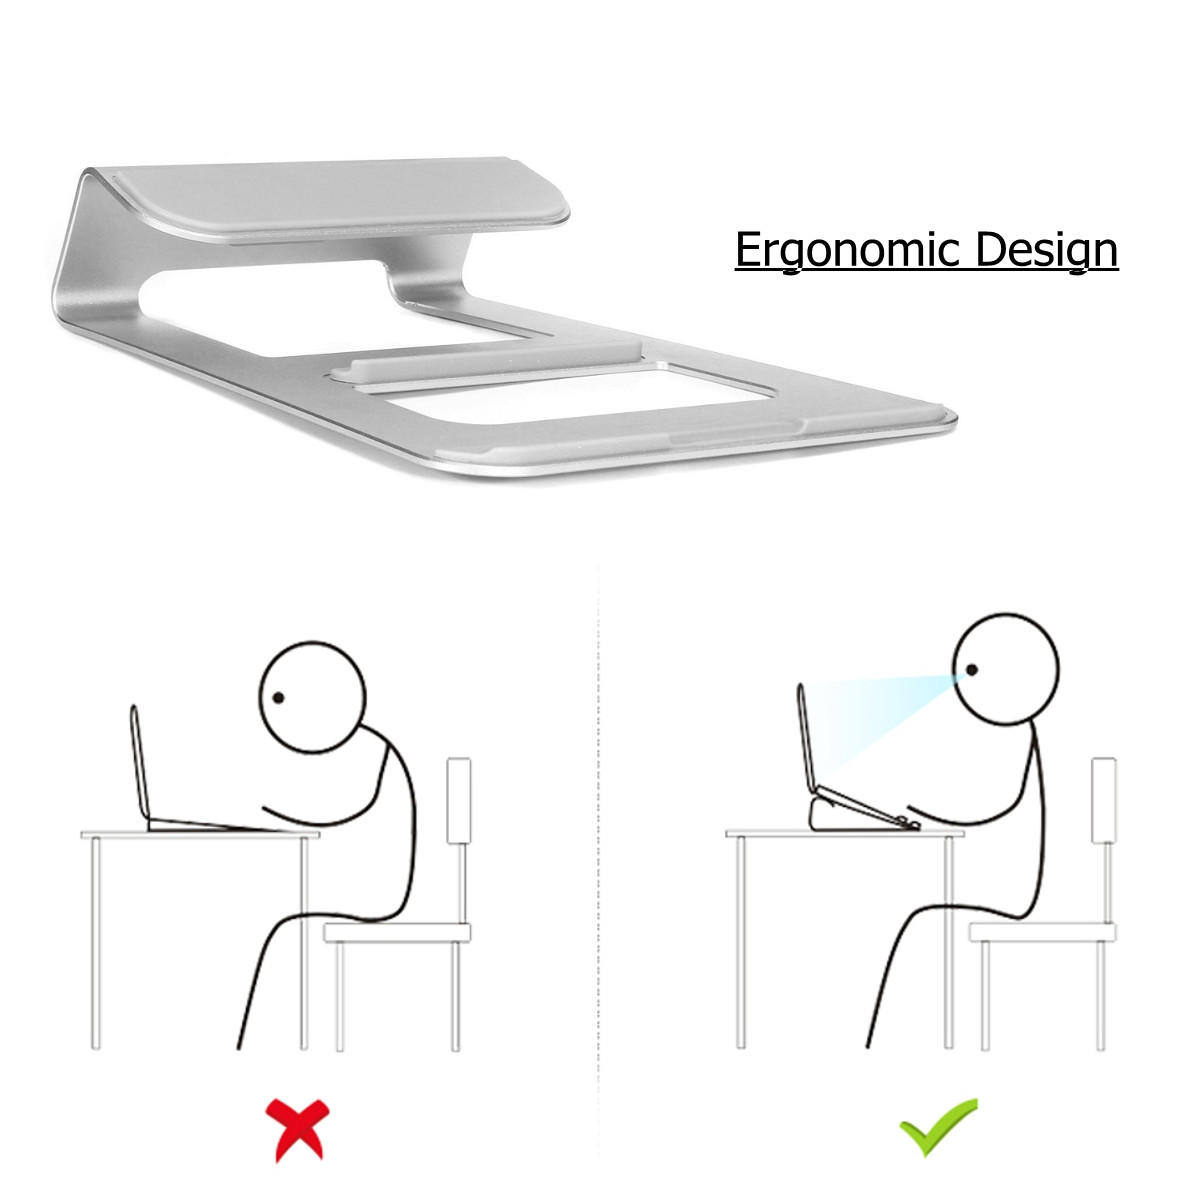 Universal-Aluminum-Alloy-Heat-Dissipation-Laptop-Stand-Tablet-Holder-for-Macbook-iPad--iPhone-1165837-4